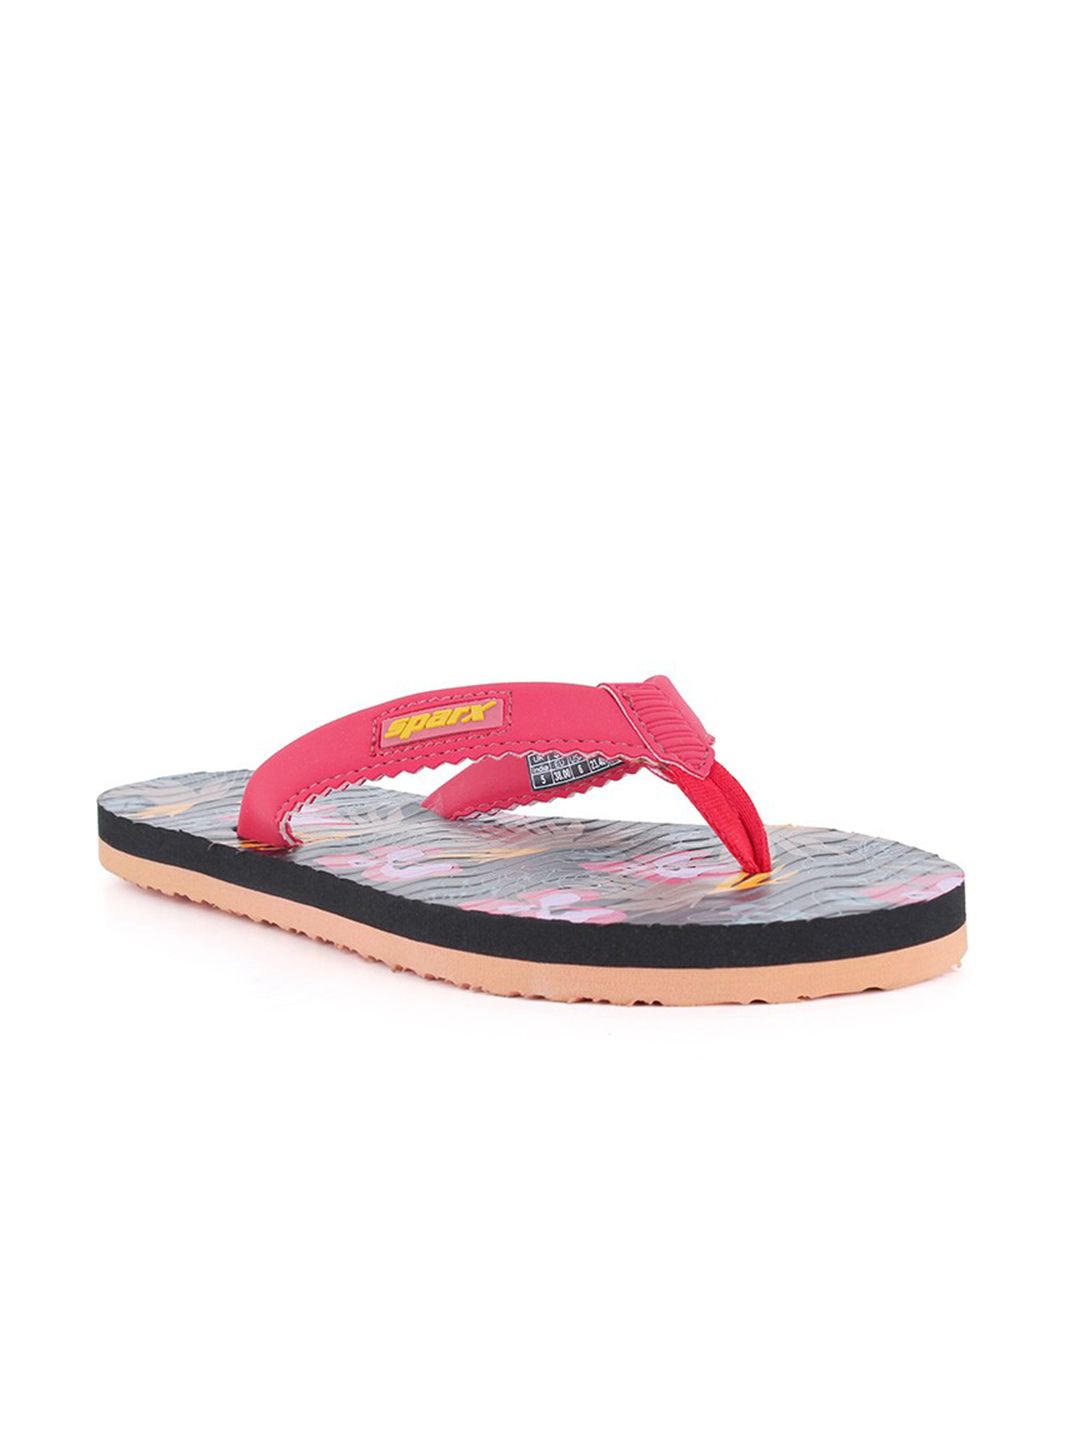 Sparx Women Peach-Coloured & Blue Printed Thong Flip-Flops Price in India